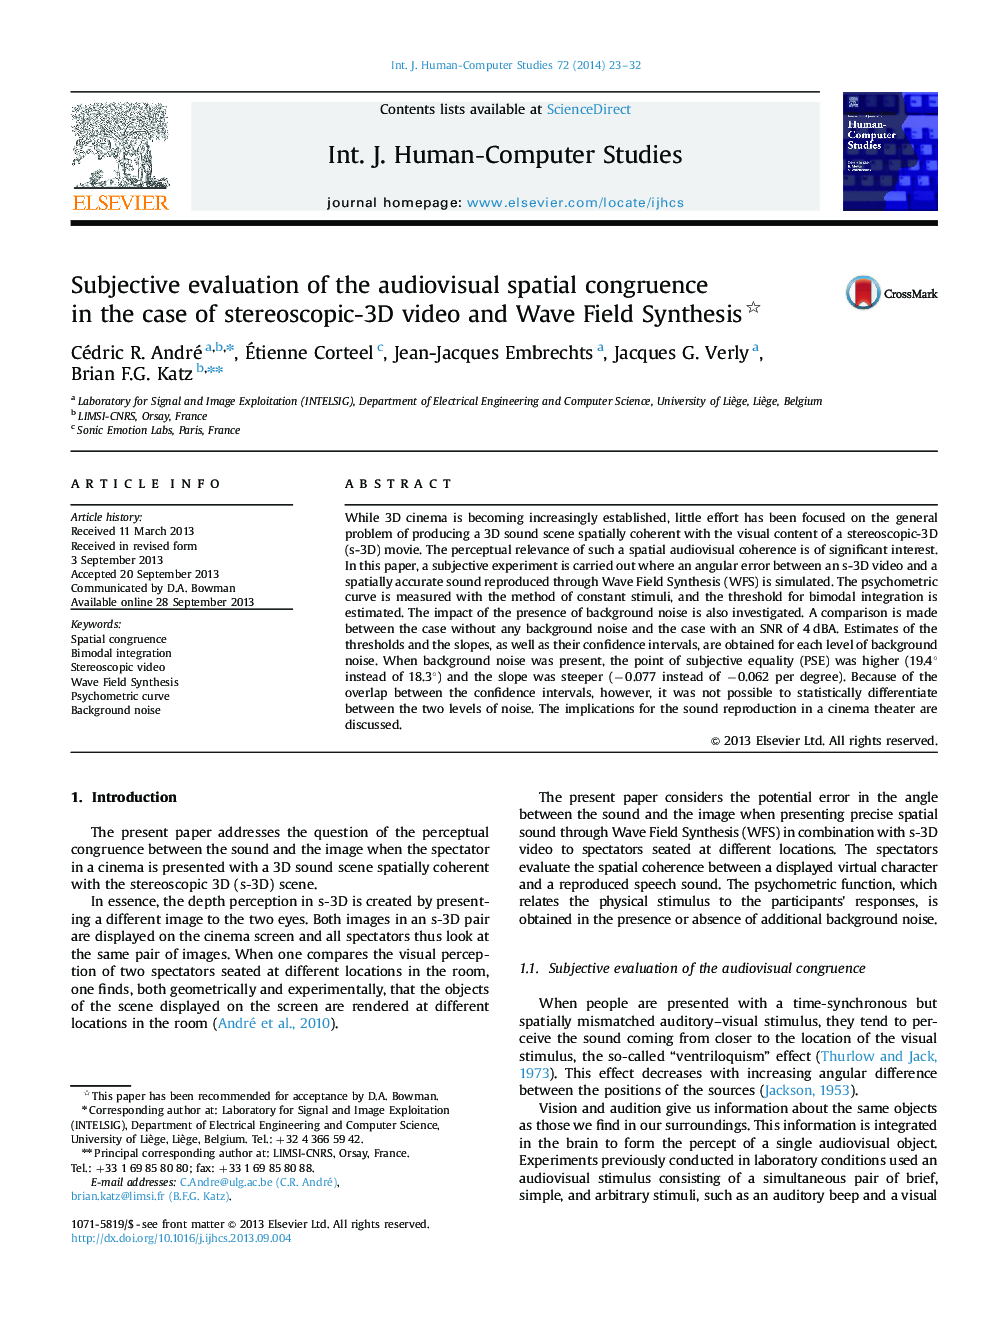 Subjective evaluation of the audiovisual spatial congruence in the case of stereoscopic-3D video and Wave Field Synthesis 